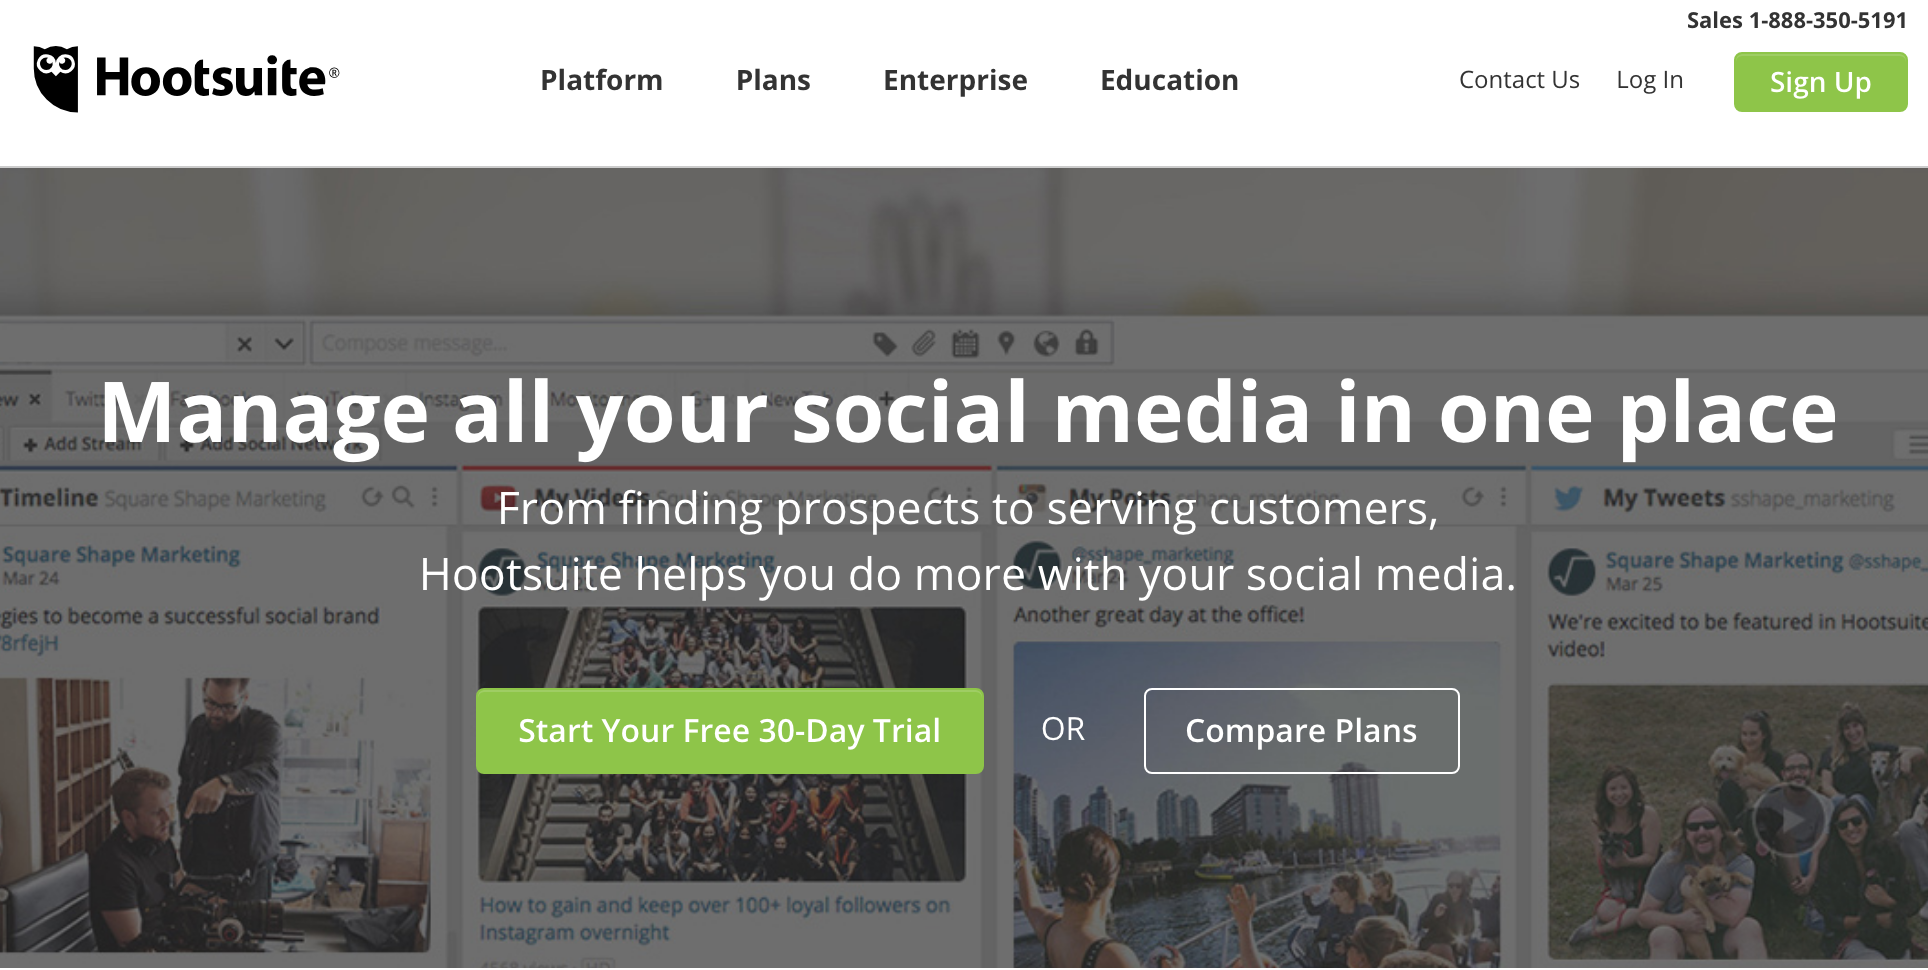 The Hootsuite homepage, published to: "Using Hootsuite to Promote Your Small Business or Non-Profit"